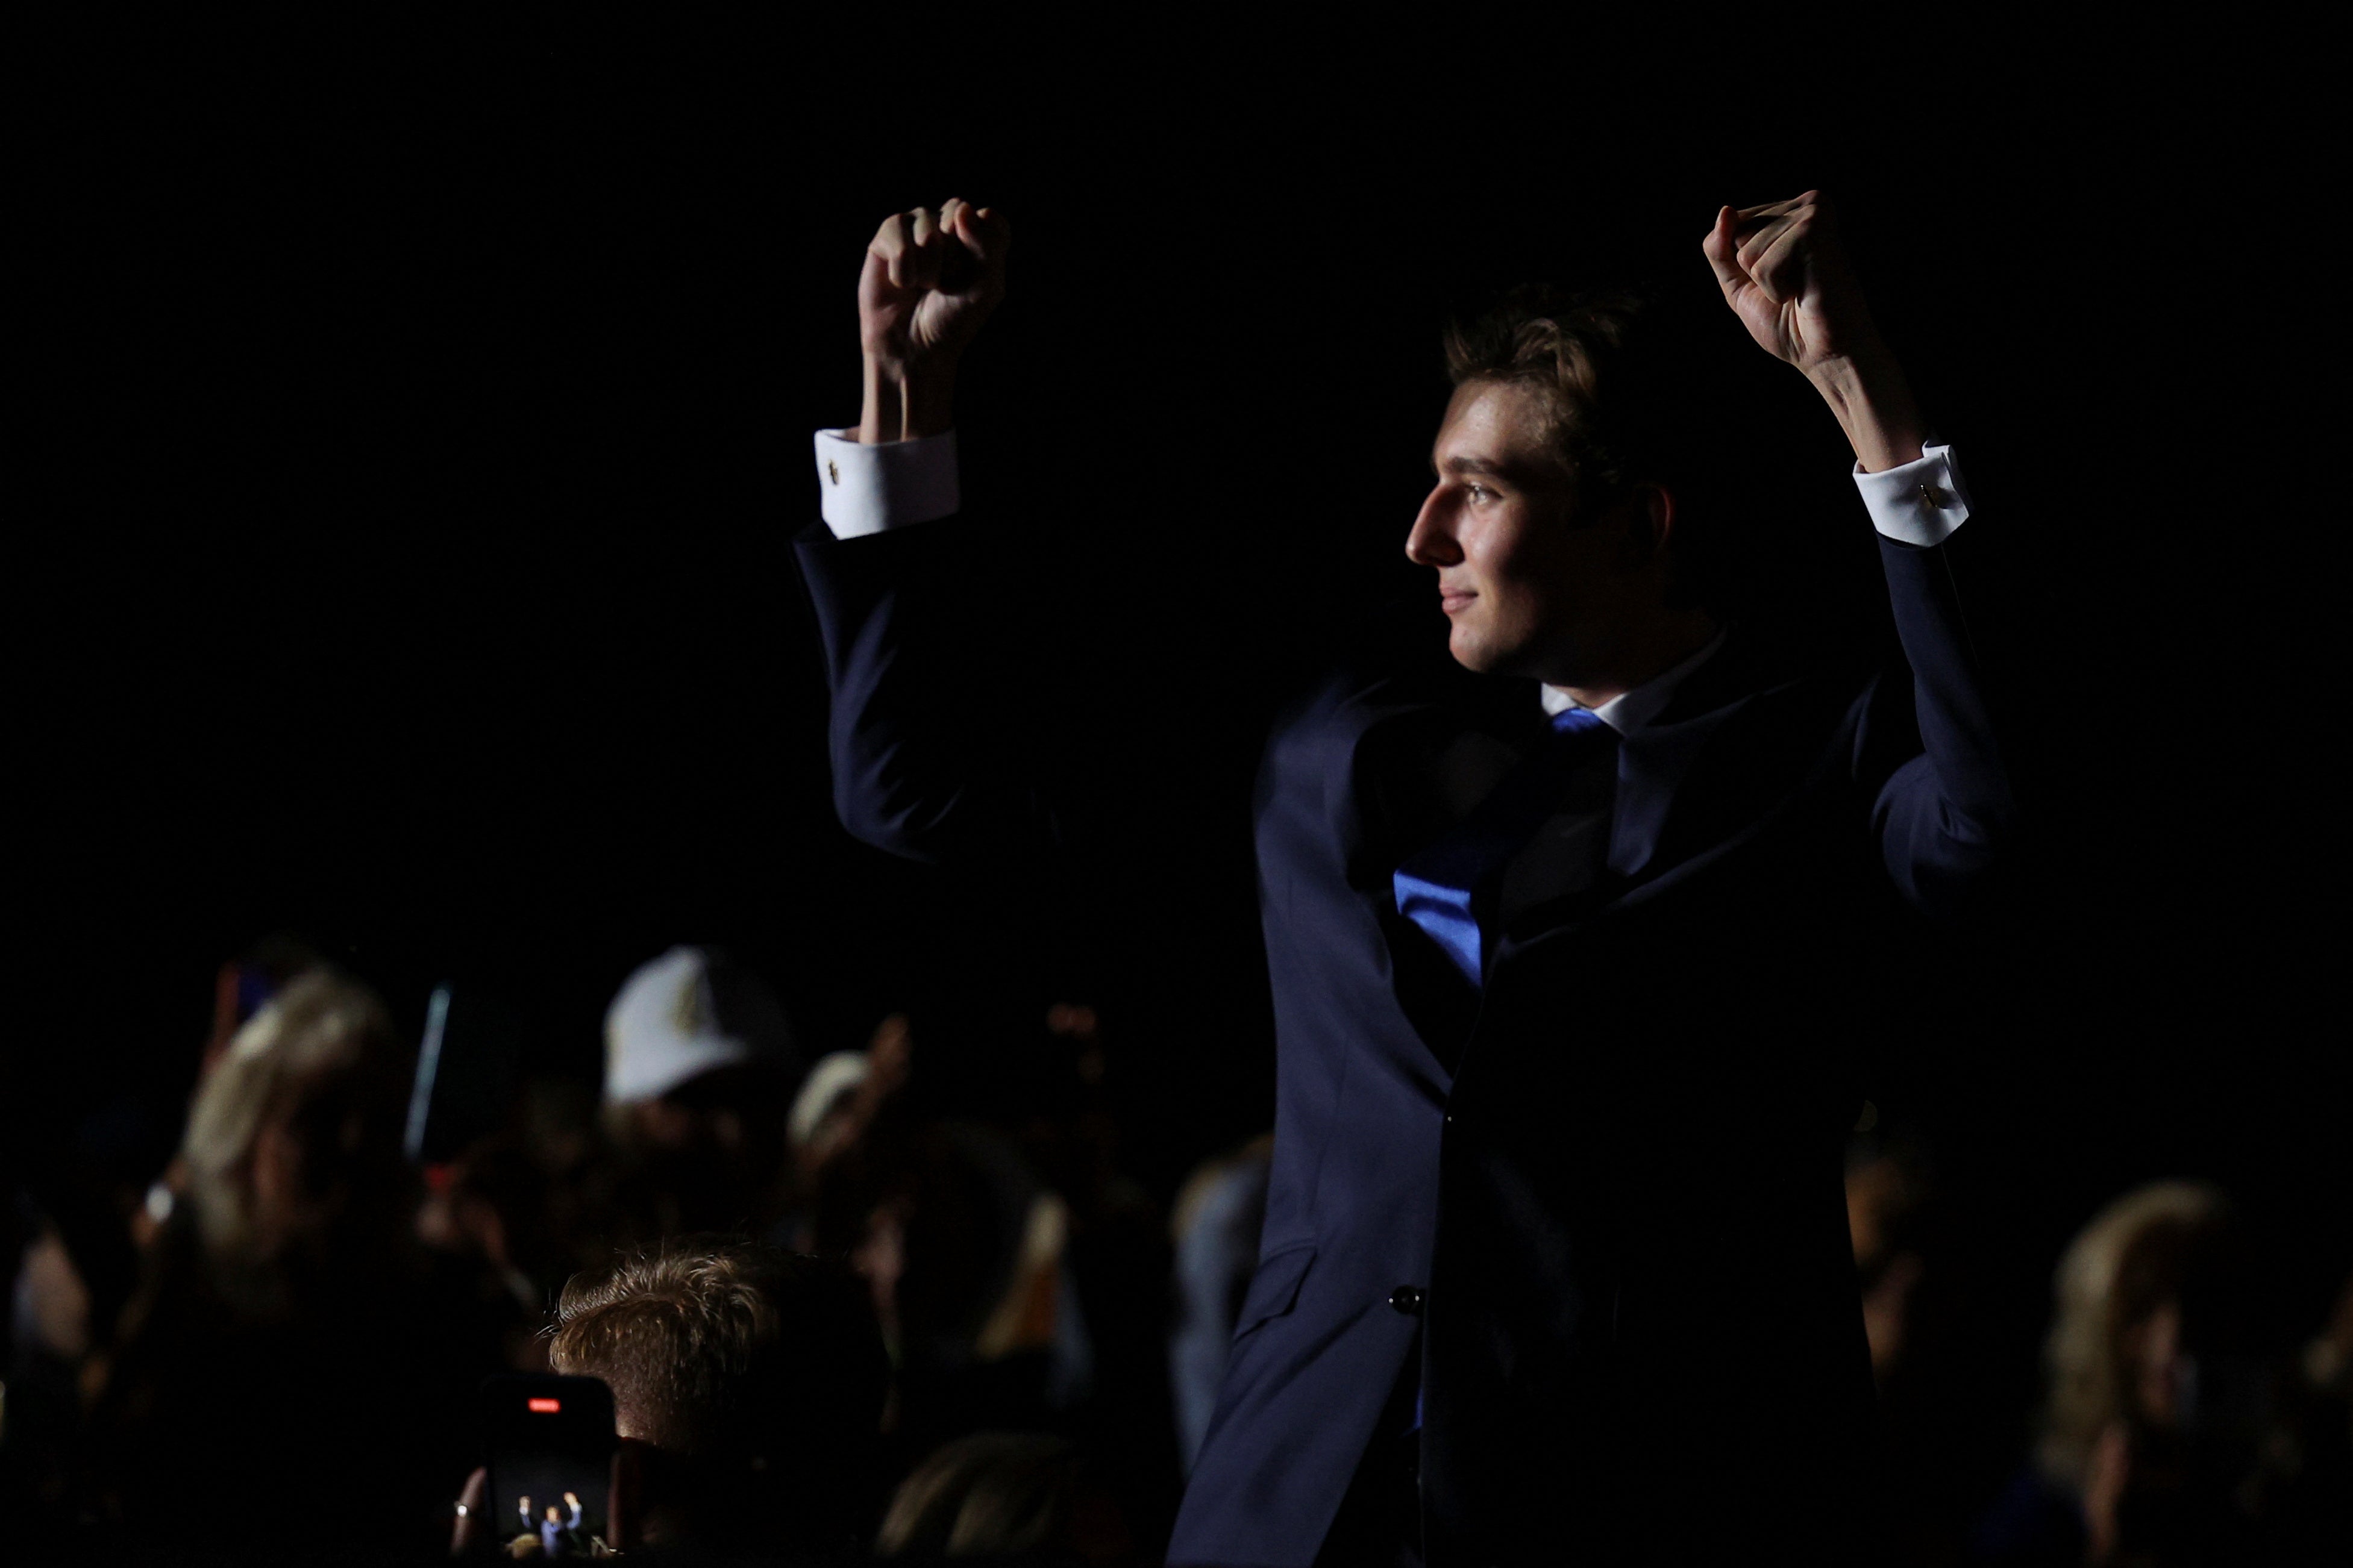 Barron Trump pumps his fists and waves to a crowd at Donald Trump’s campaign rally in Florida on July 9.